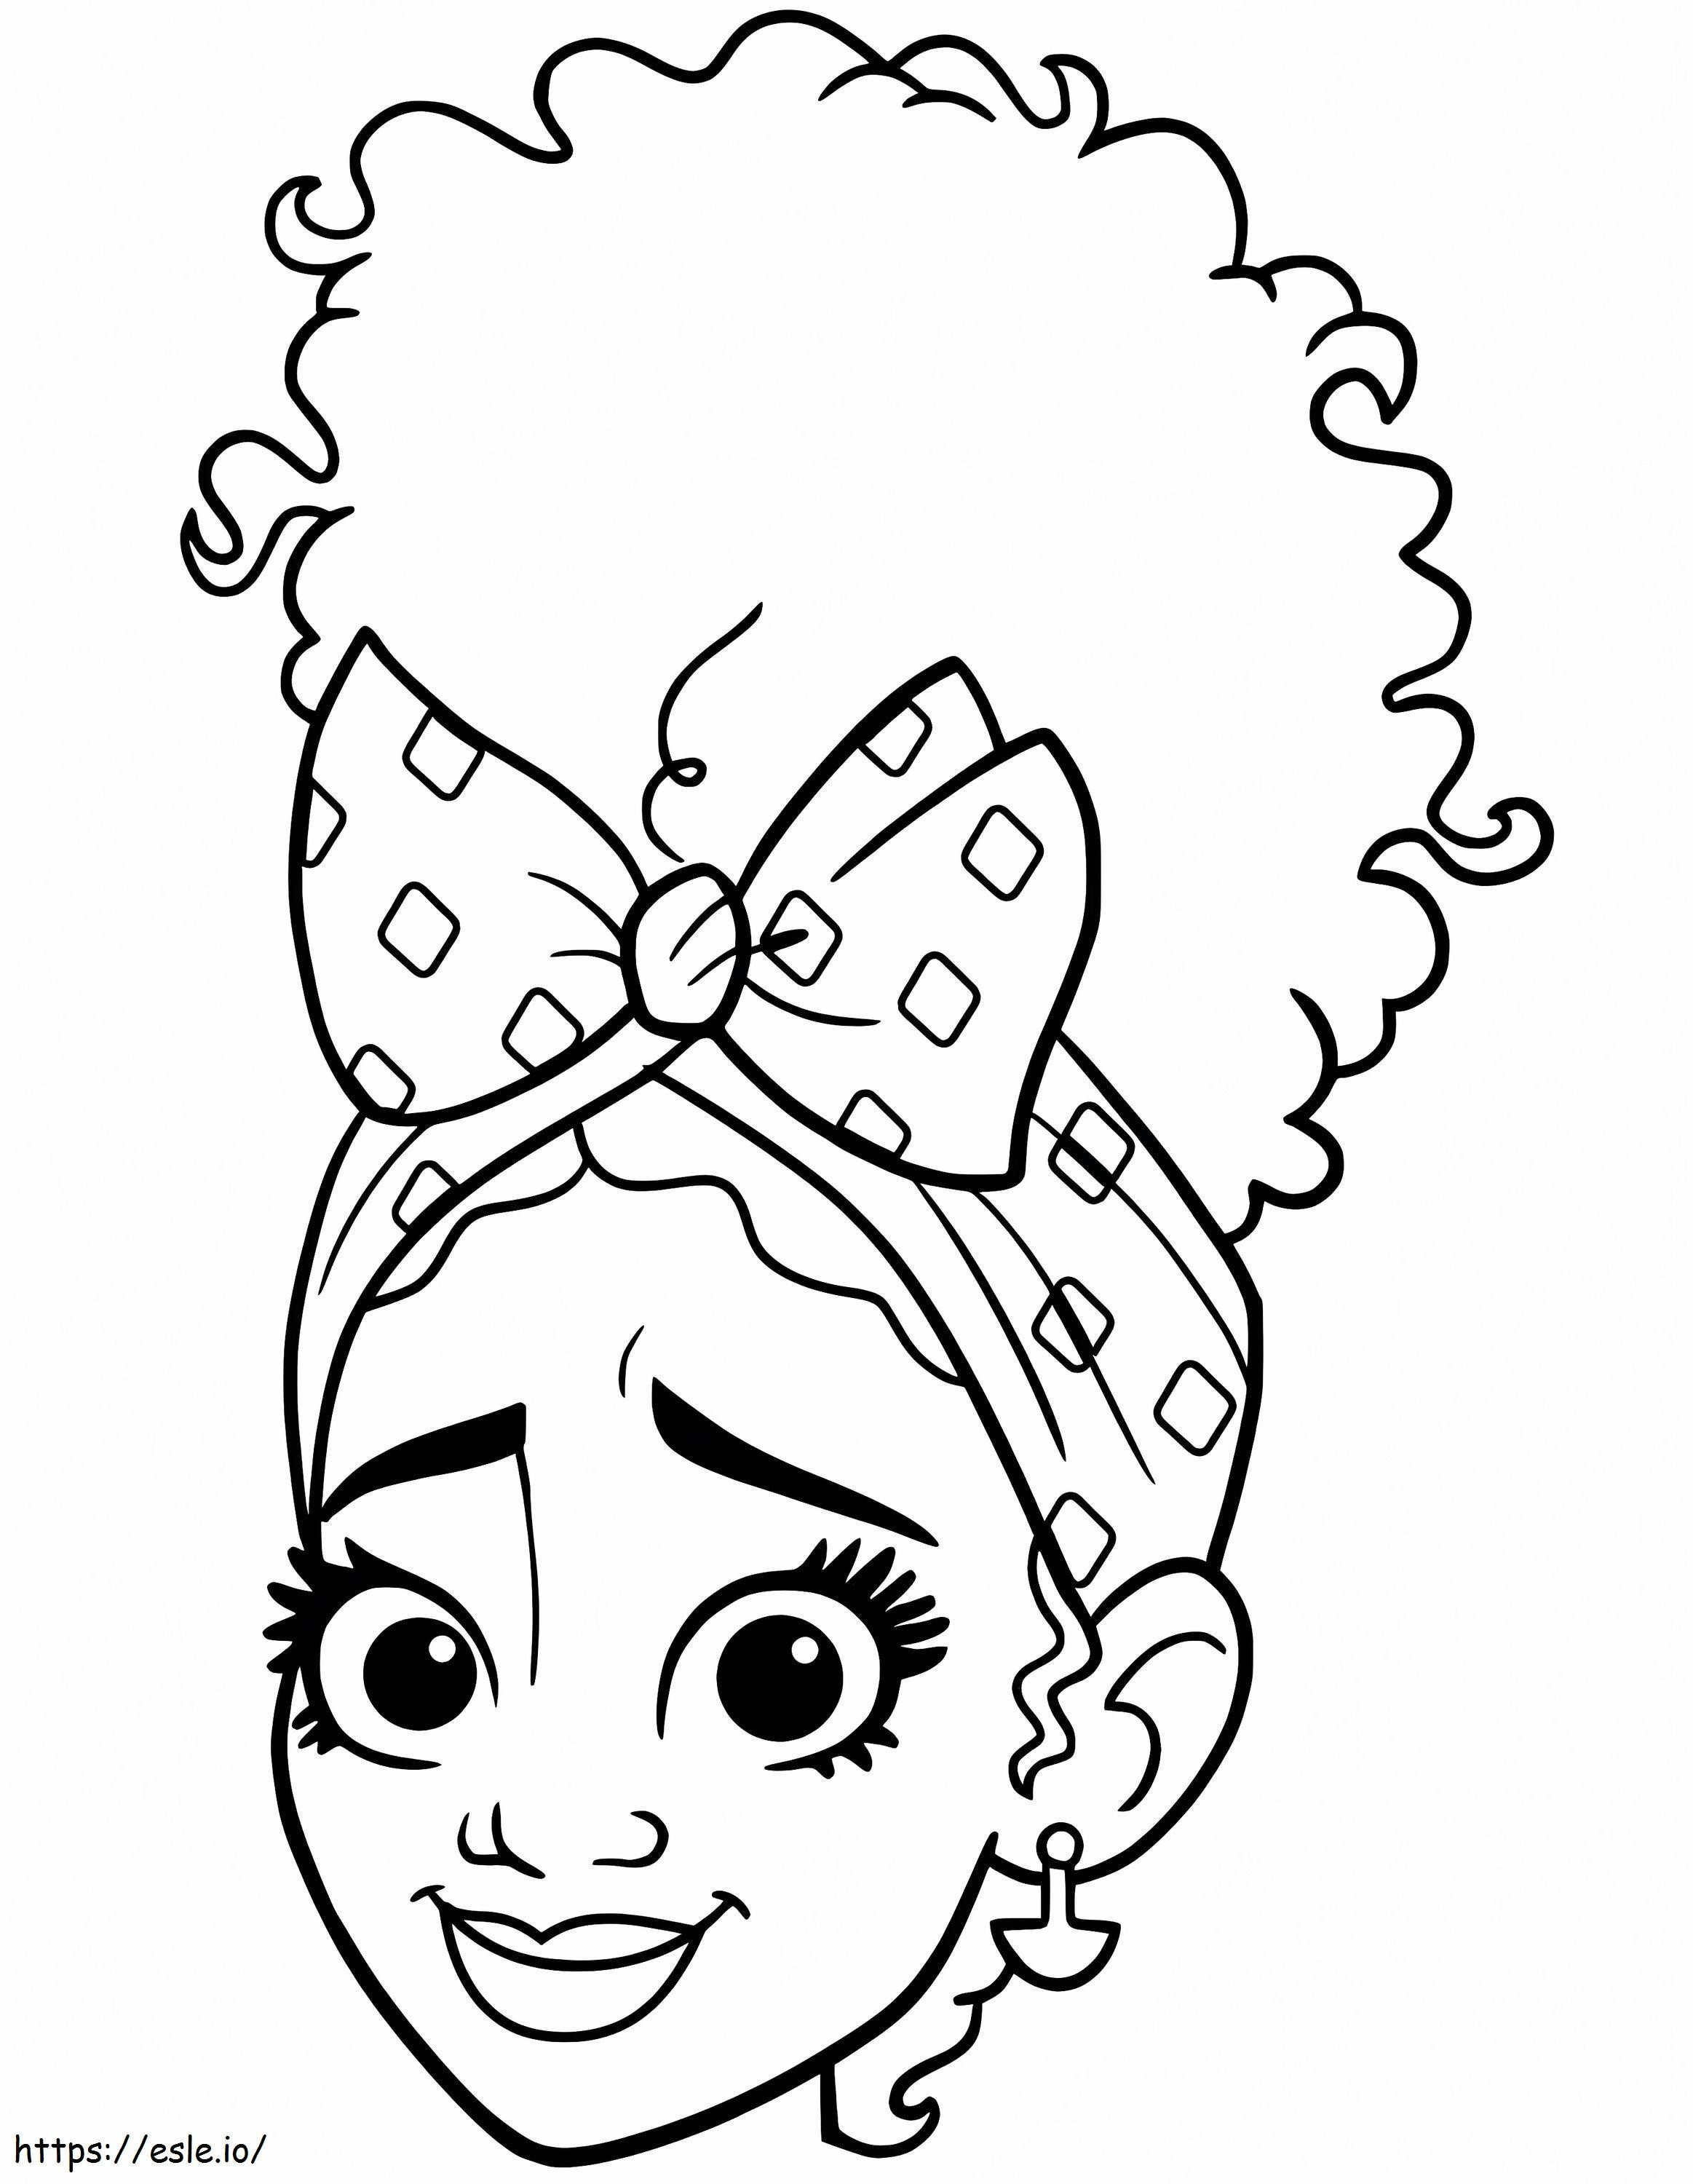 Charm Pains coloring page